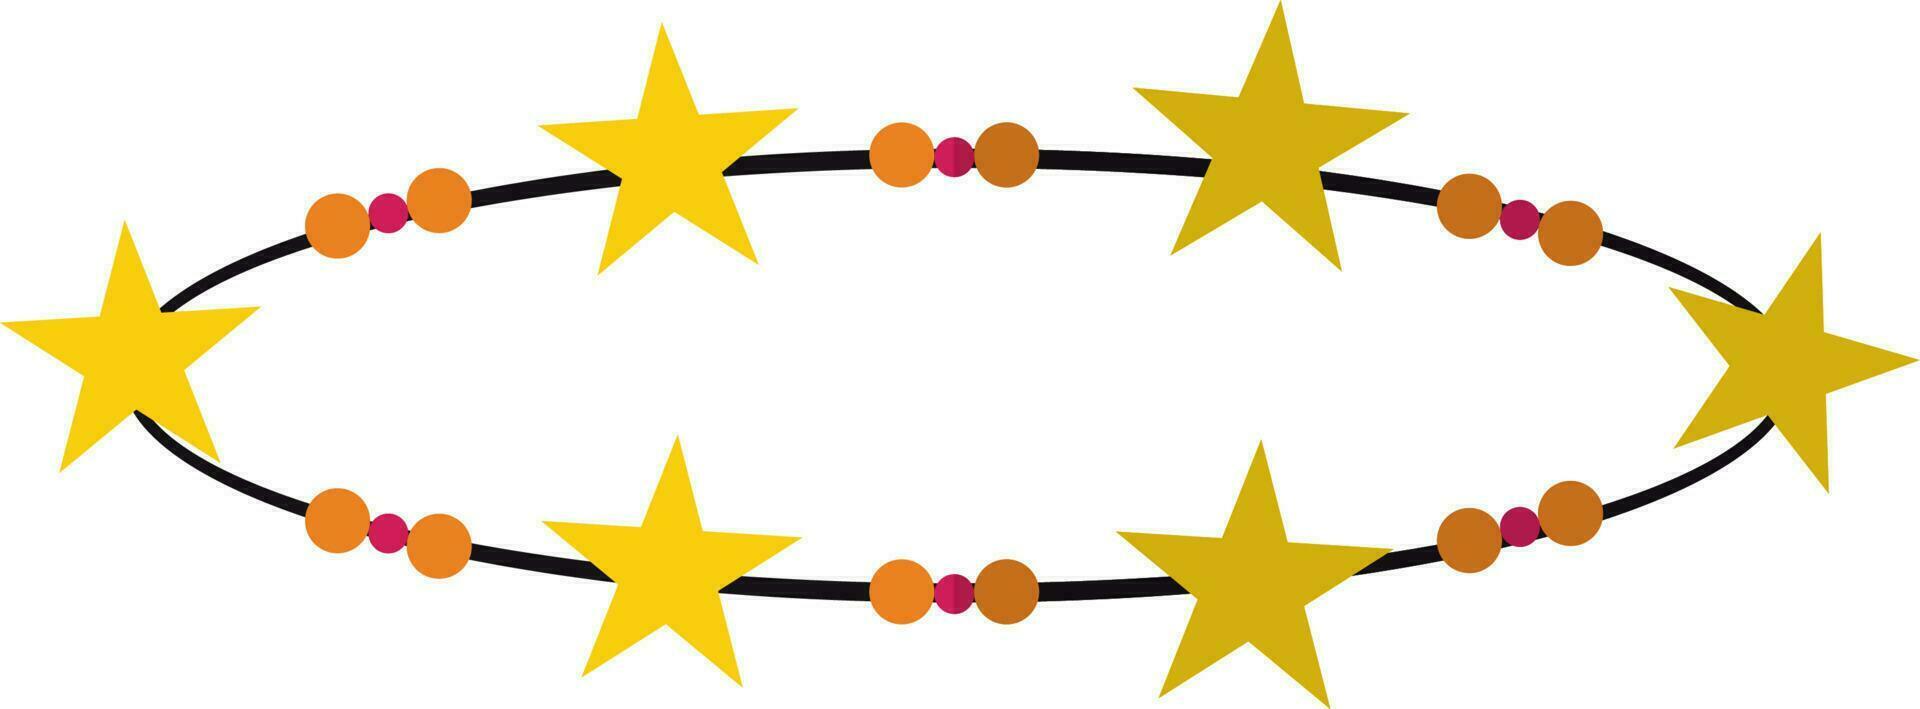 Yellow star decorated crown in circular shape. vector